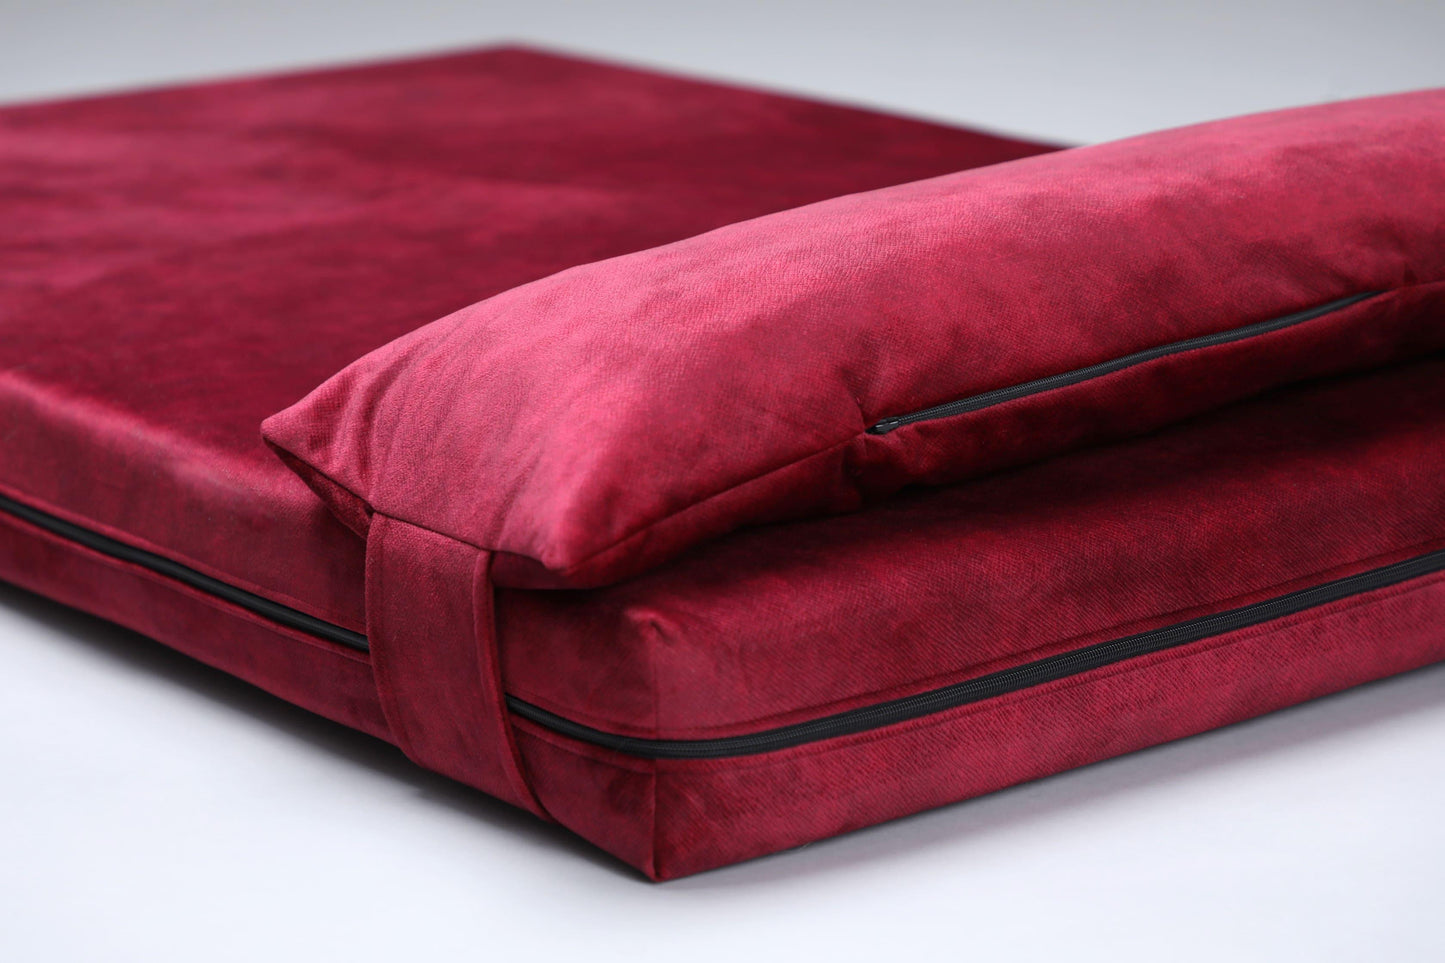 Dog bed for large dogs | Extra comfort & support | 2-sided | RUBY RED - premium dog goods handmade in Europe by My Wild Other